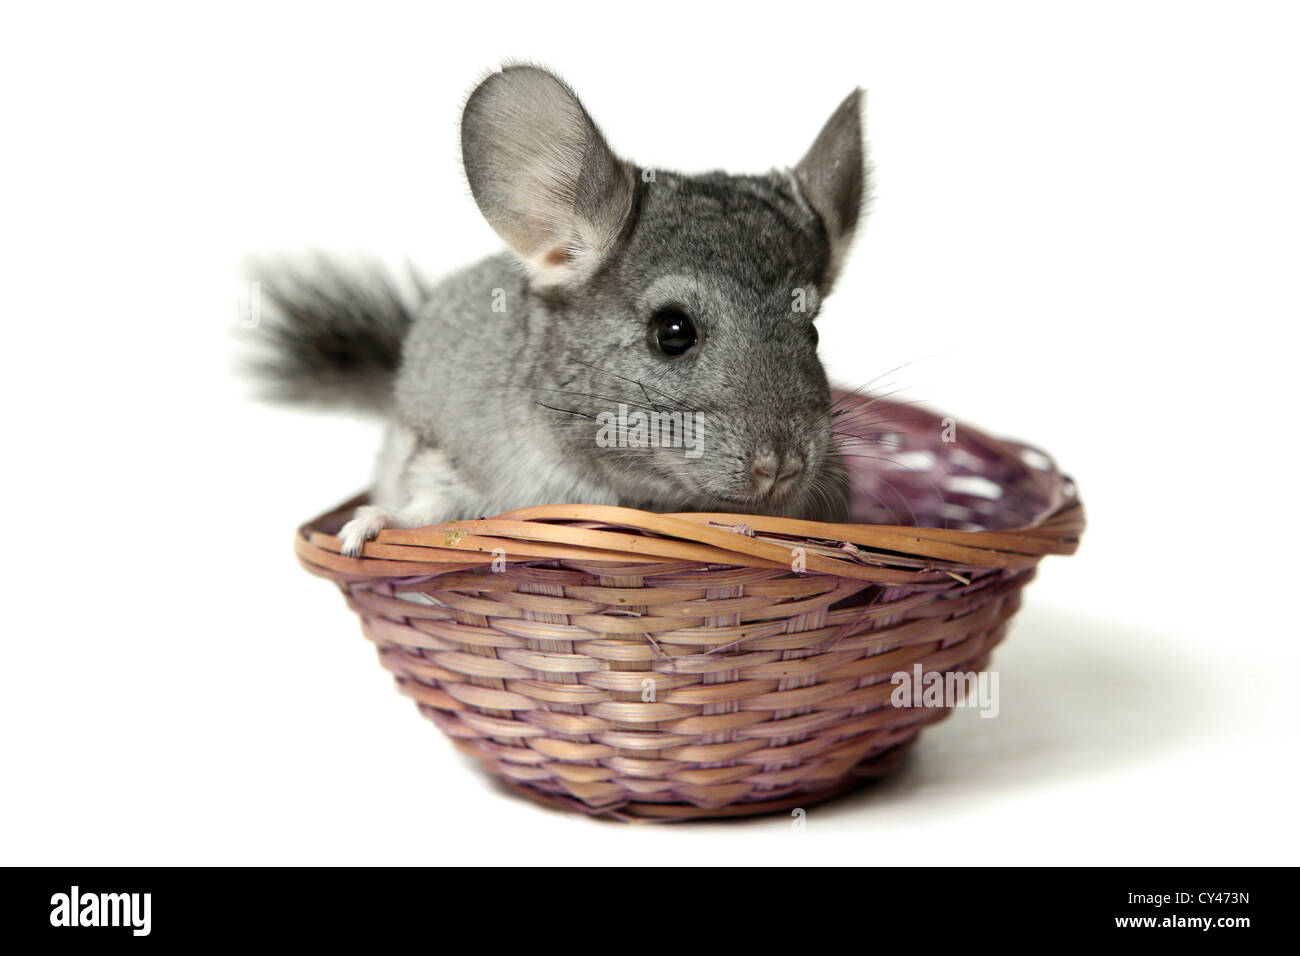 Mouse in a straw basket On white Background Stock Photo